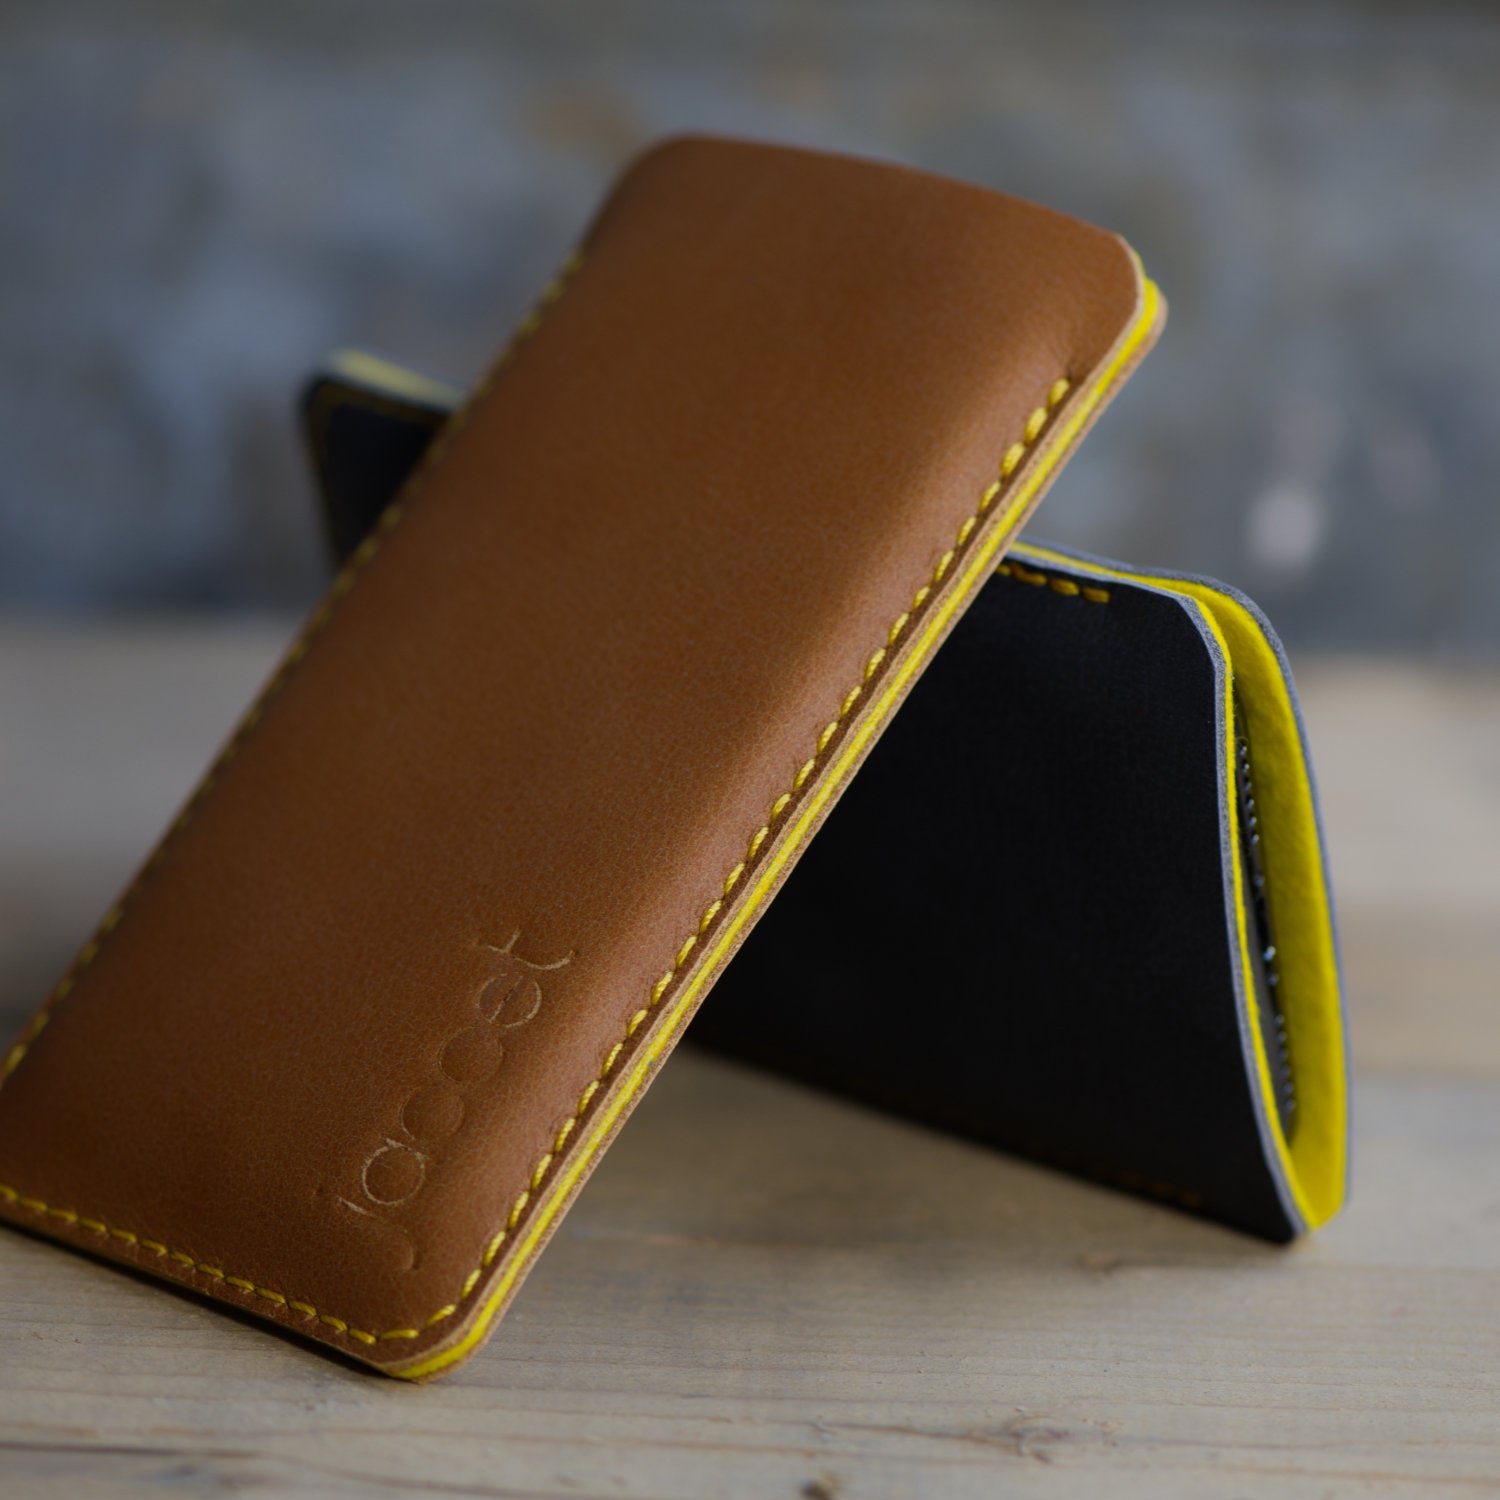 JACCET leather Xiaomi sleeve - Cognac color leather with yellow wool felt - 100% Handmade